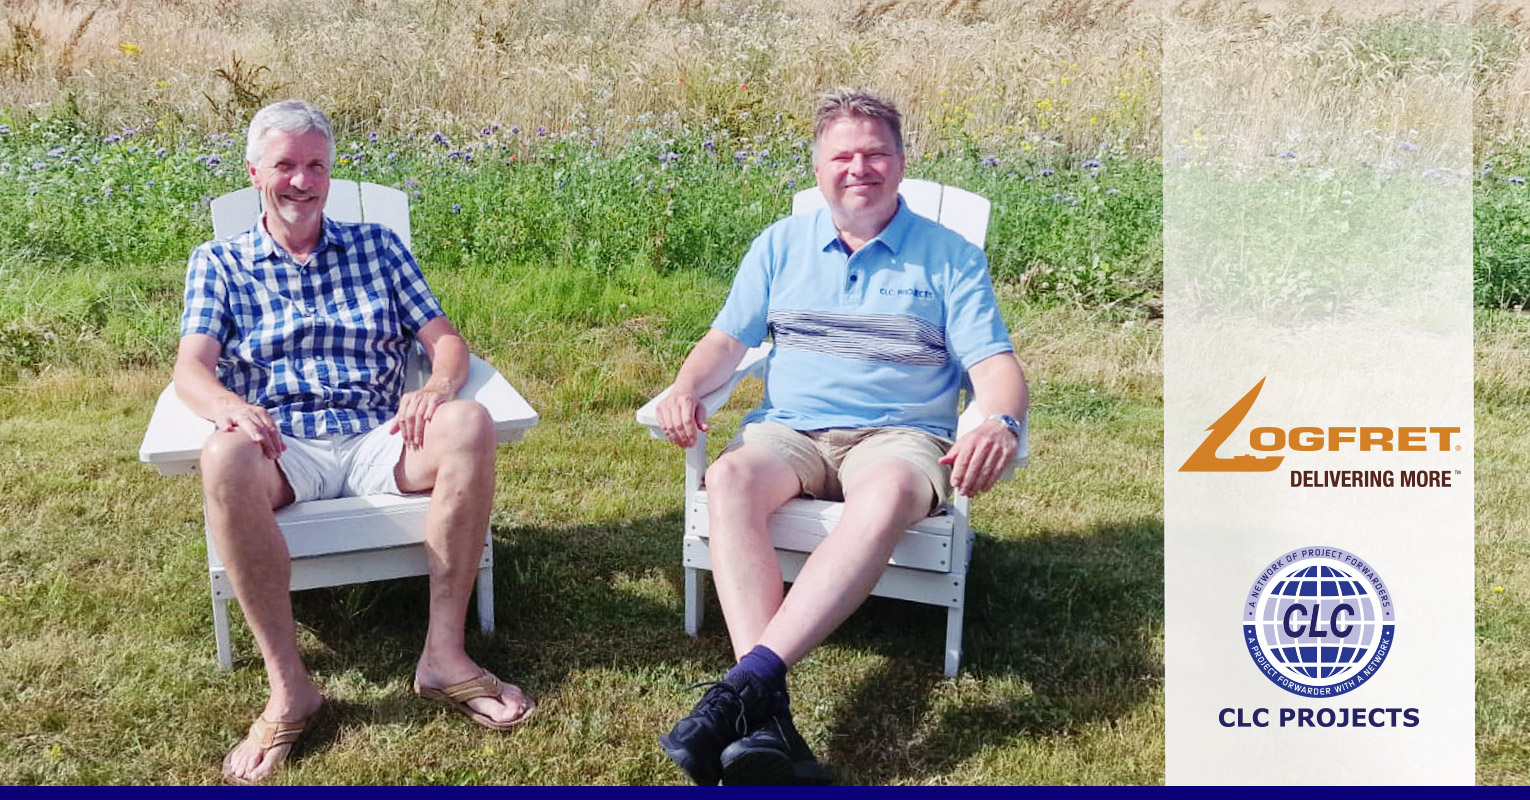 CLC Projects Chairman met with Mr. Hans Mikkelsen, the Global COO of Logfret having a summertime meeting in Djusrsland, Denmark